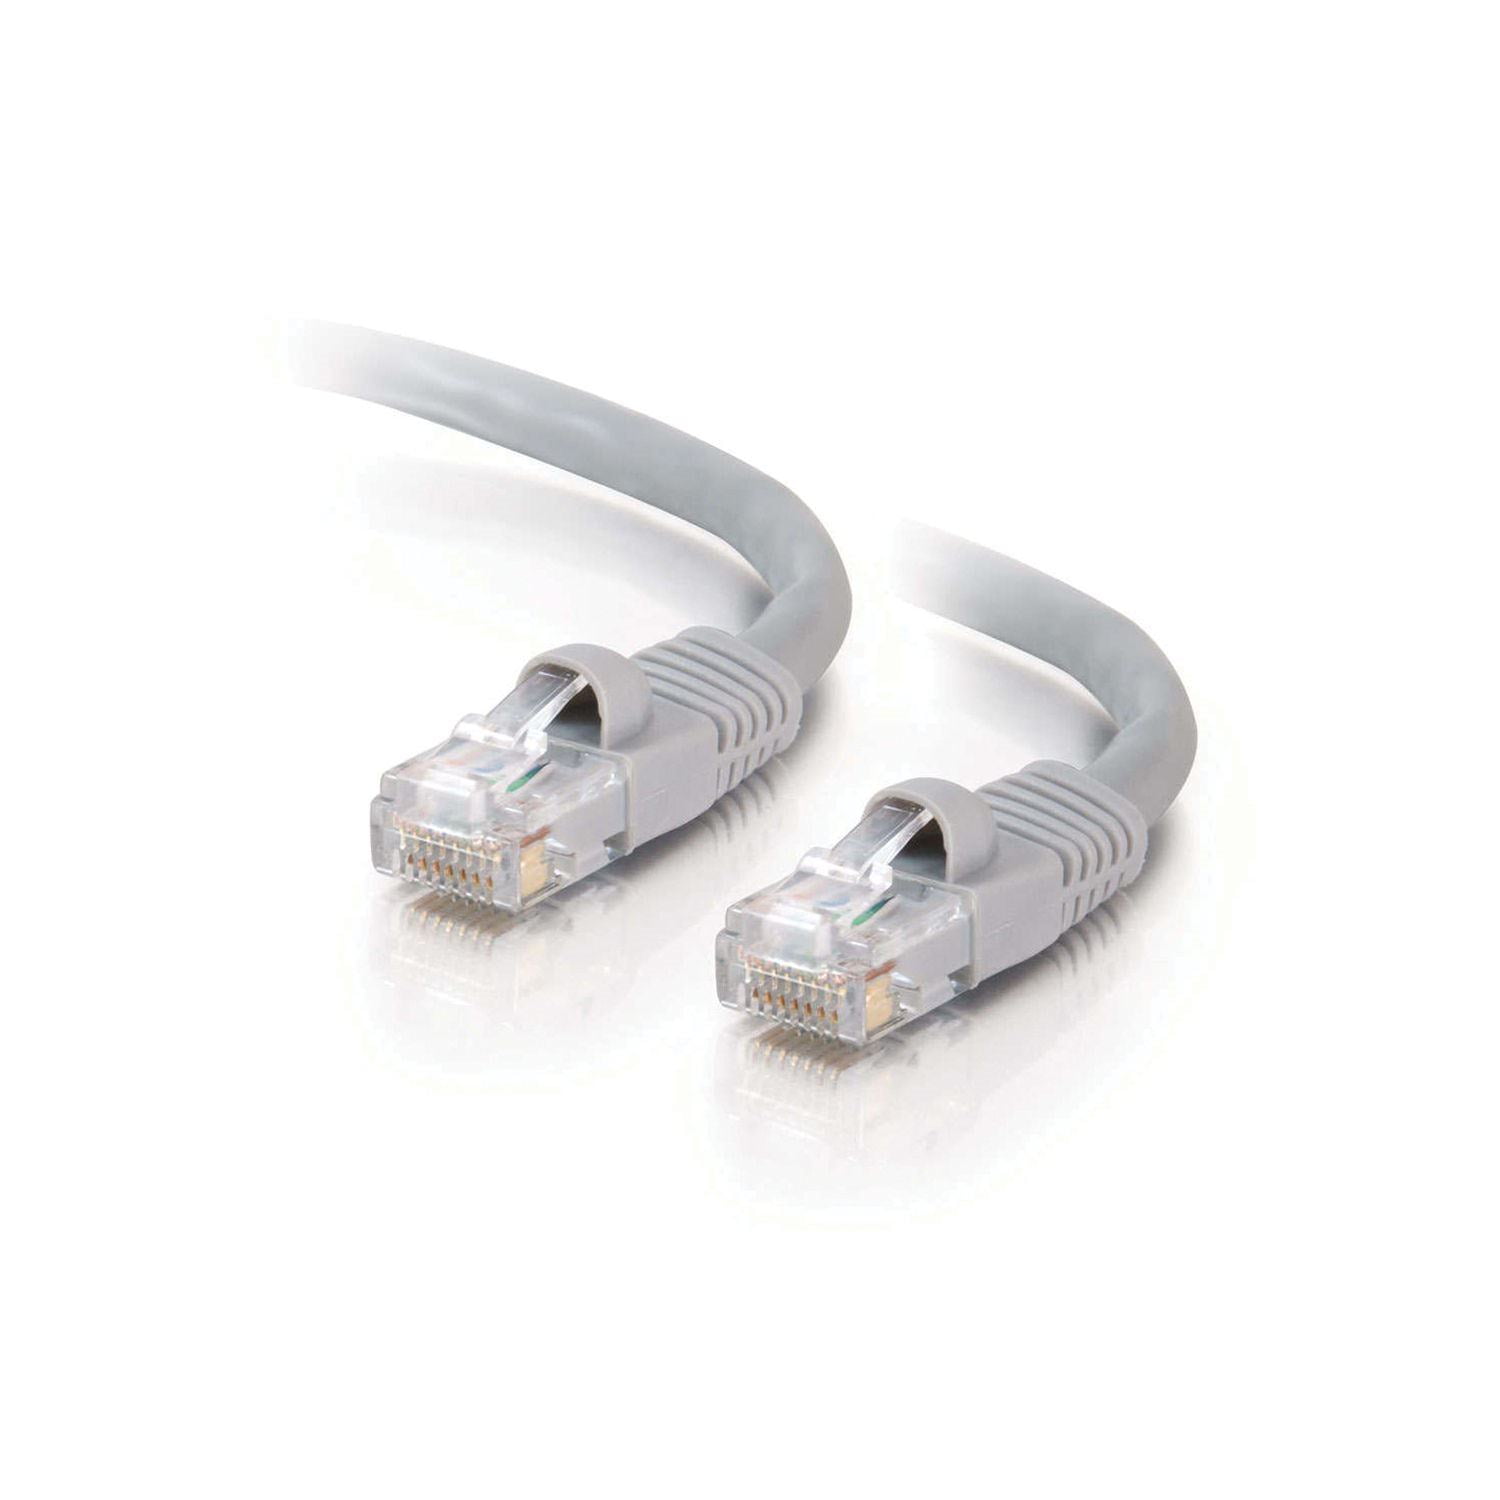 UTP White Network Patch Cable CyberWireAndCable 7ft Cat5e Snagless Unshielded